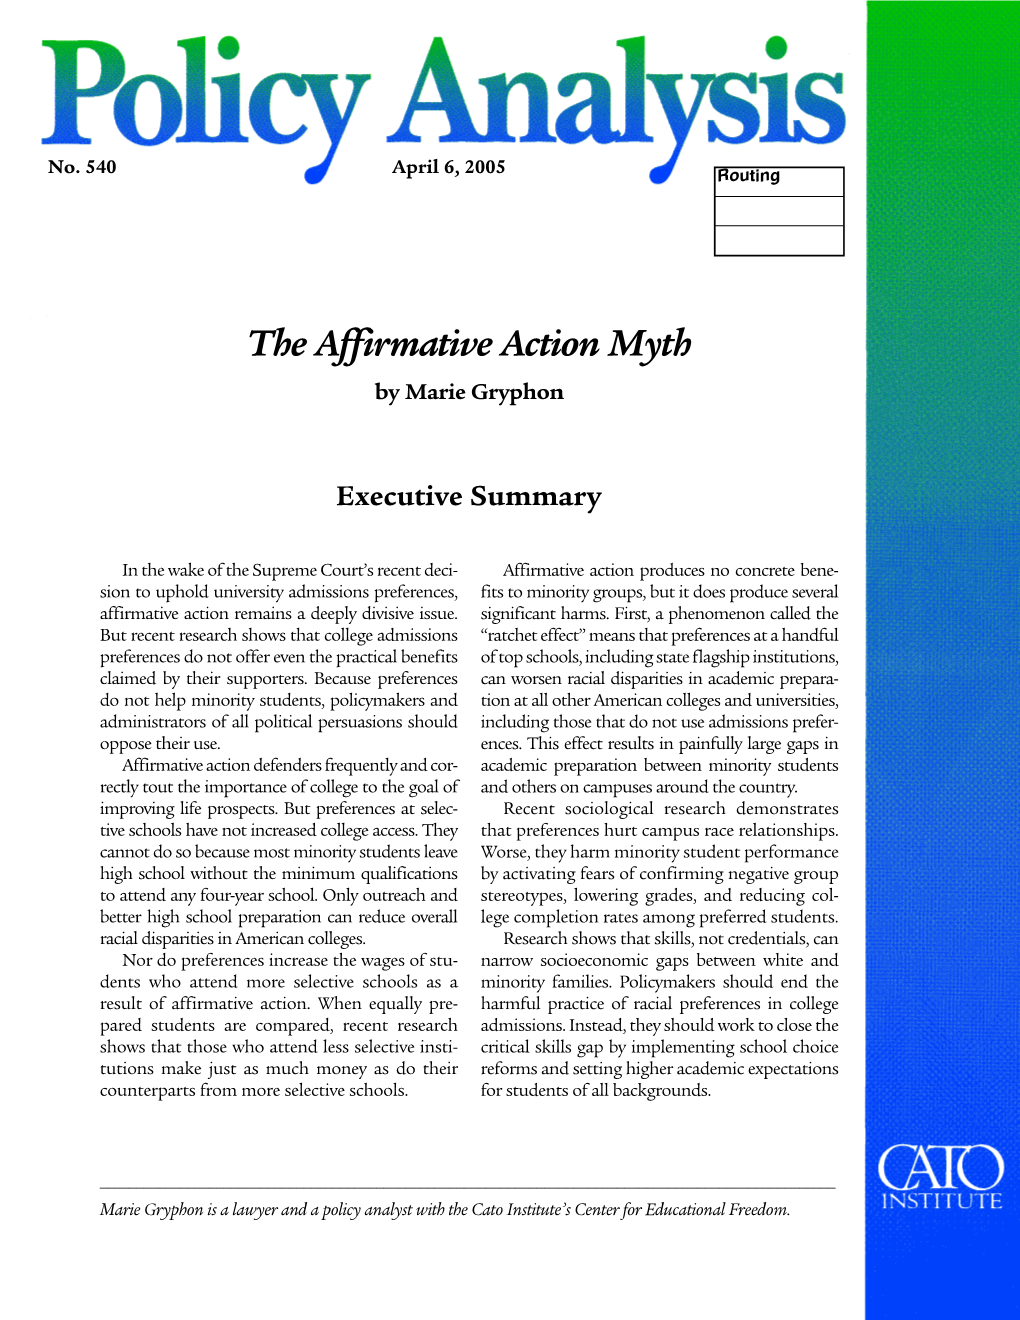 The Affirmative Action Myth by Marie Gryphon